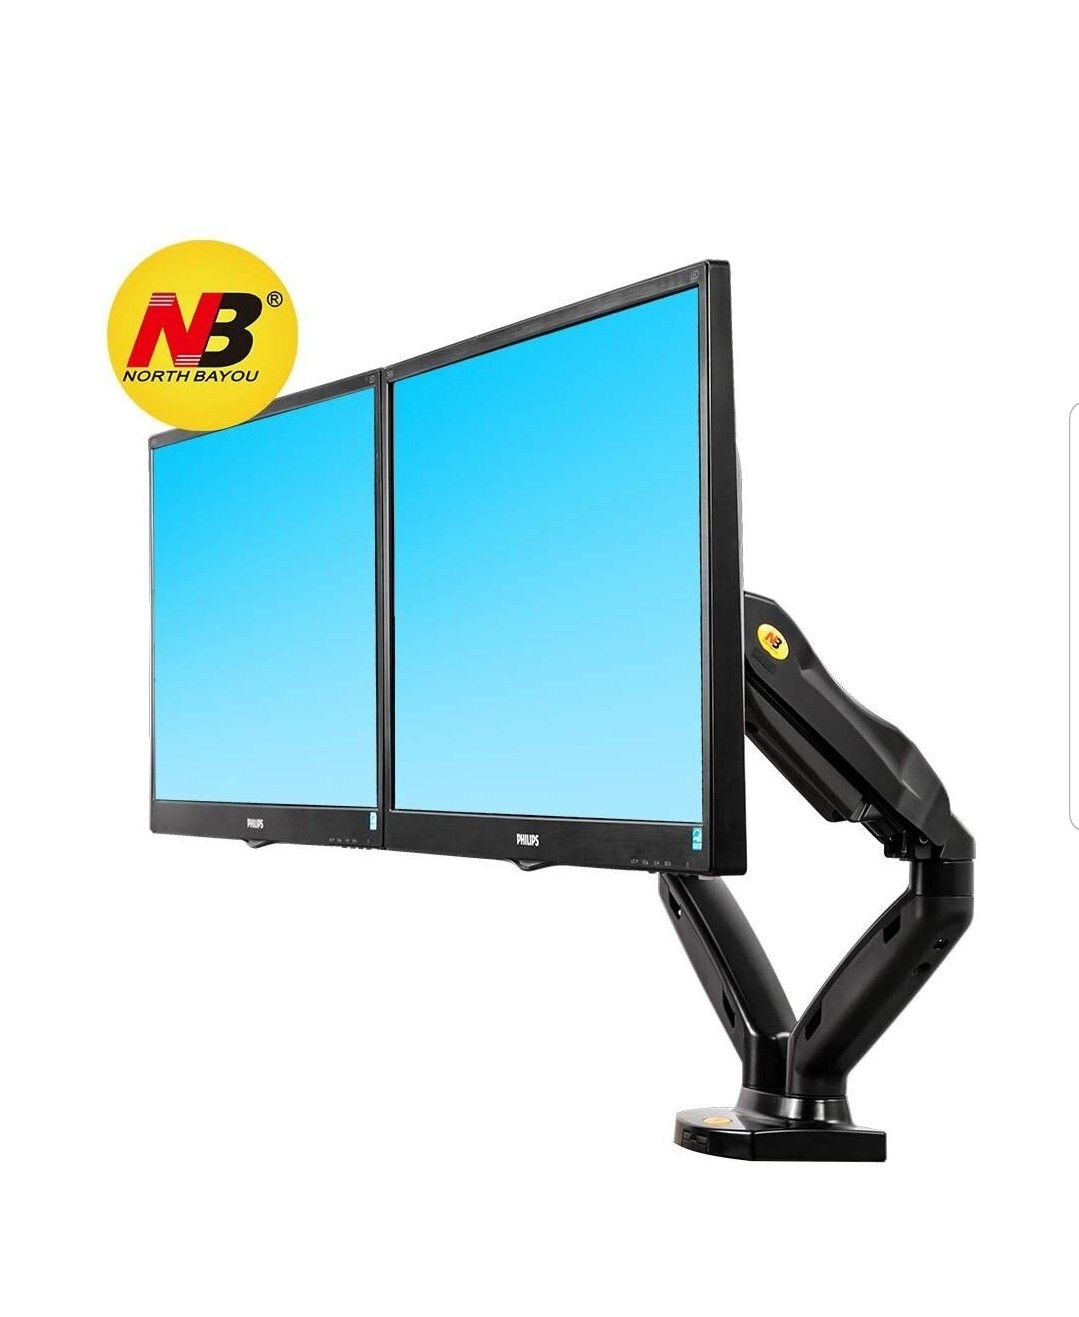 NB North Bayou Dual Monitor Desk Mount Stand Full Motion Swivel Computer Monitor Arm for Two Screens 17-27 Inch with 14.3lbs